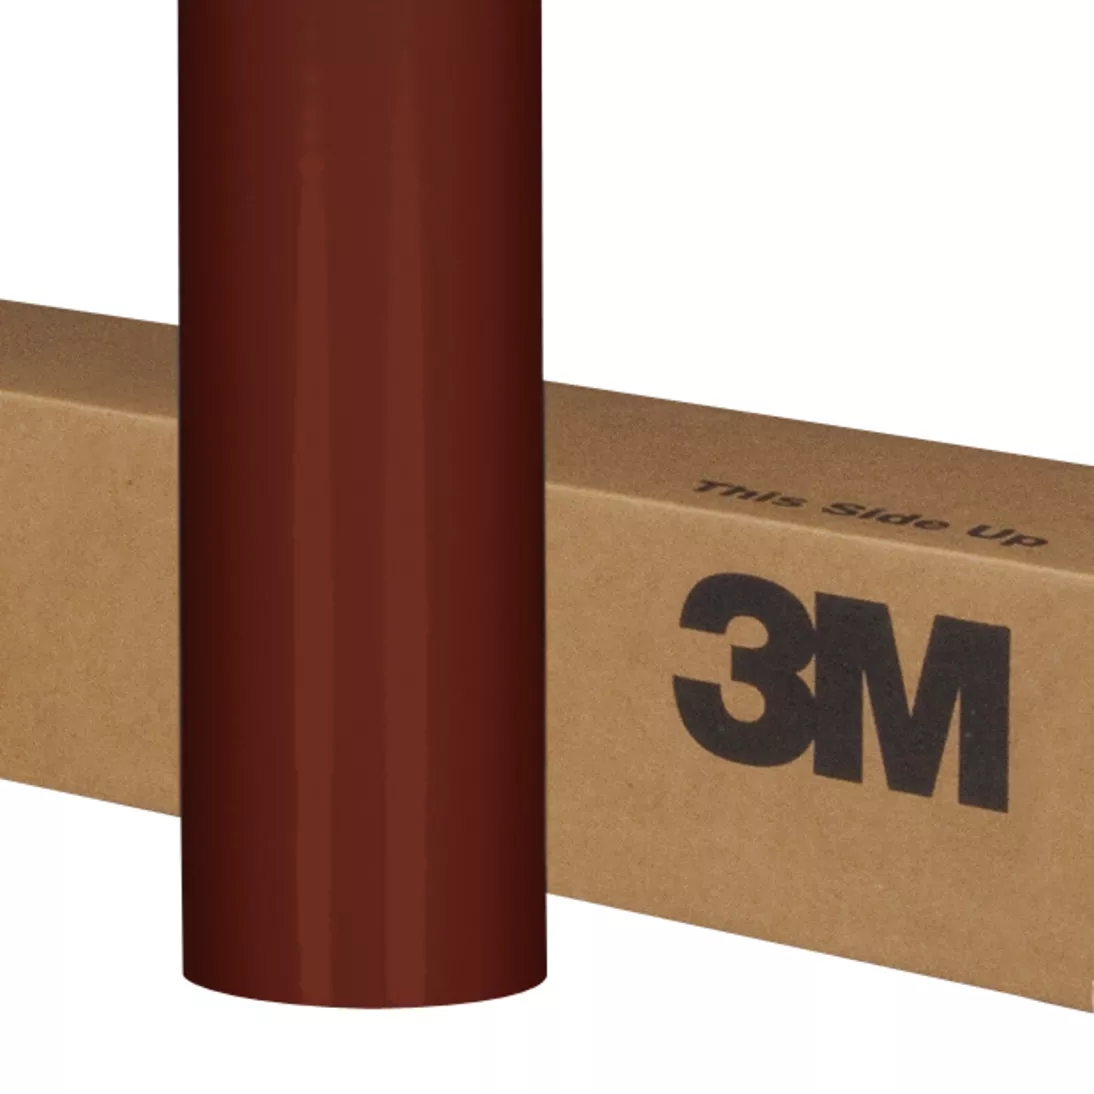 3M™ Scotchcal™ ElectroCut™ Graphic Film 7725-29, Russet Brown, 36 in x
50 yd